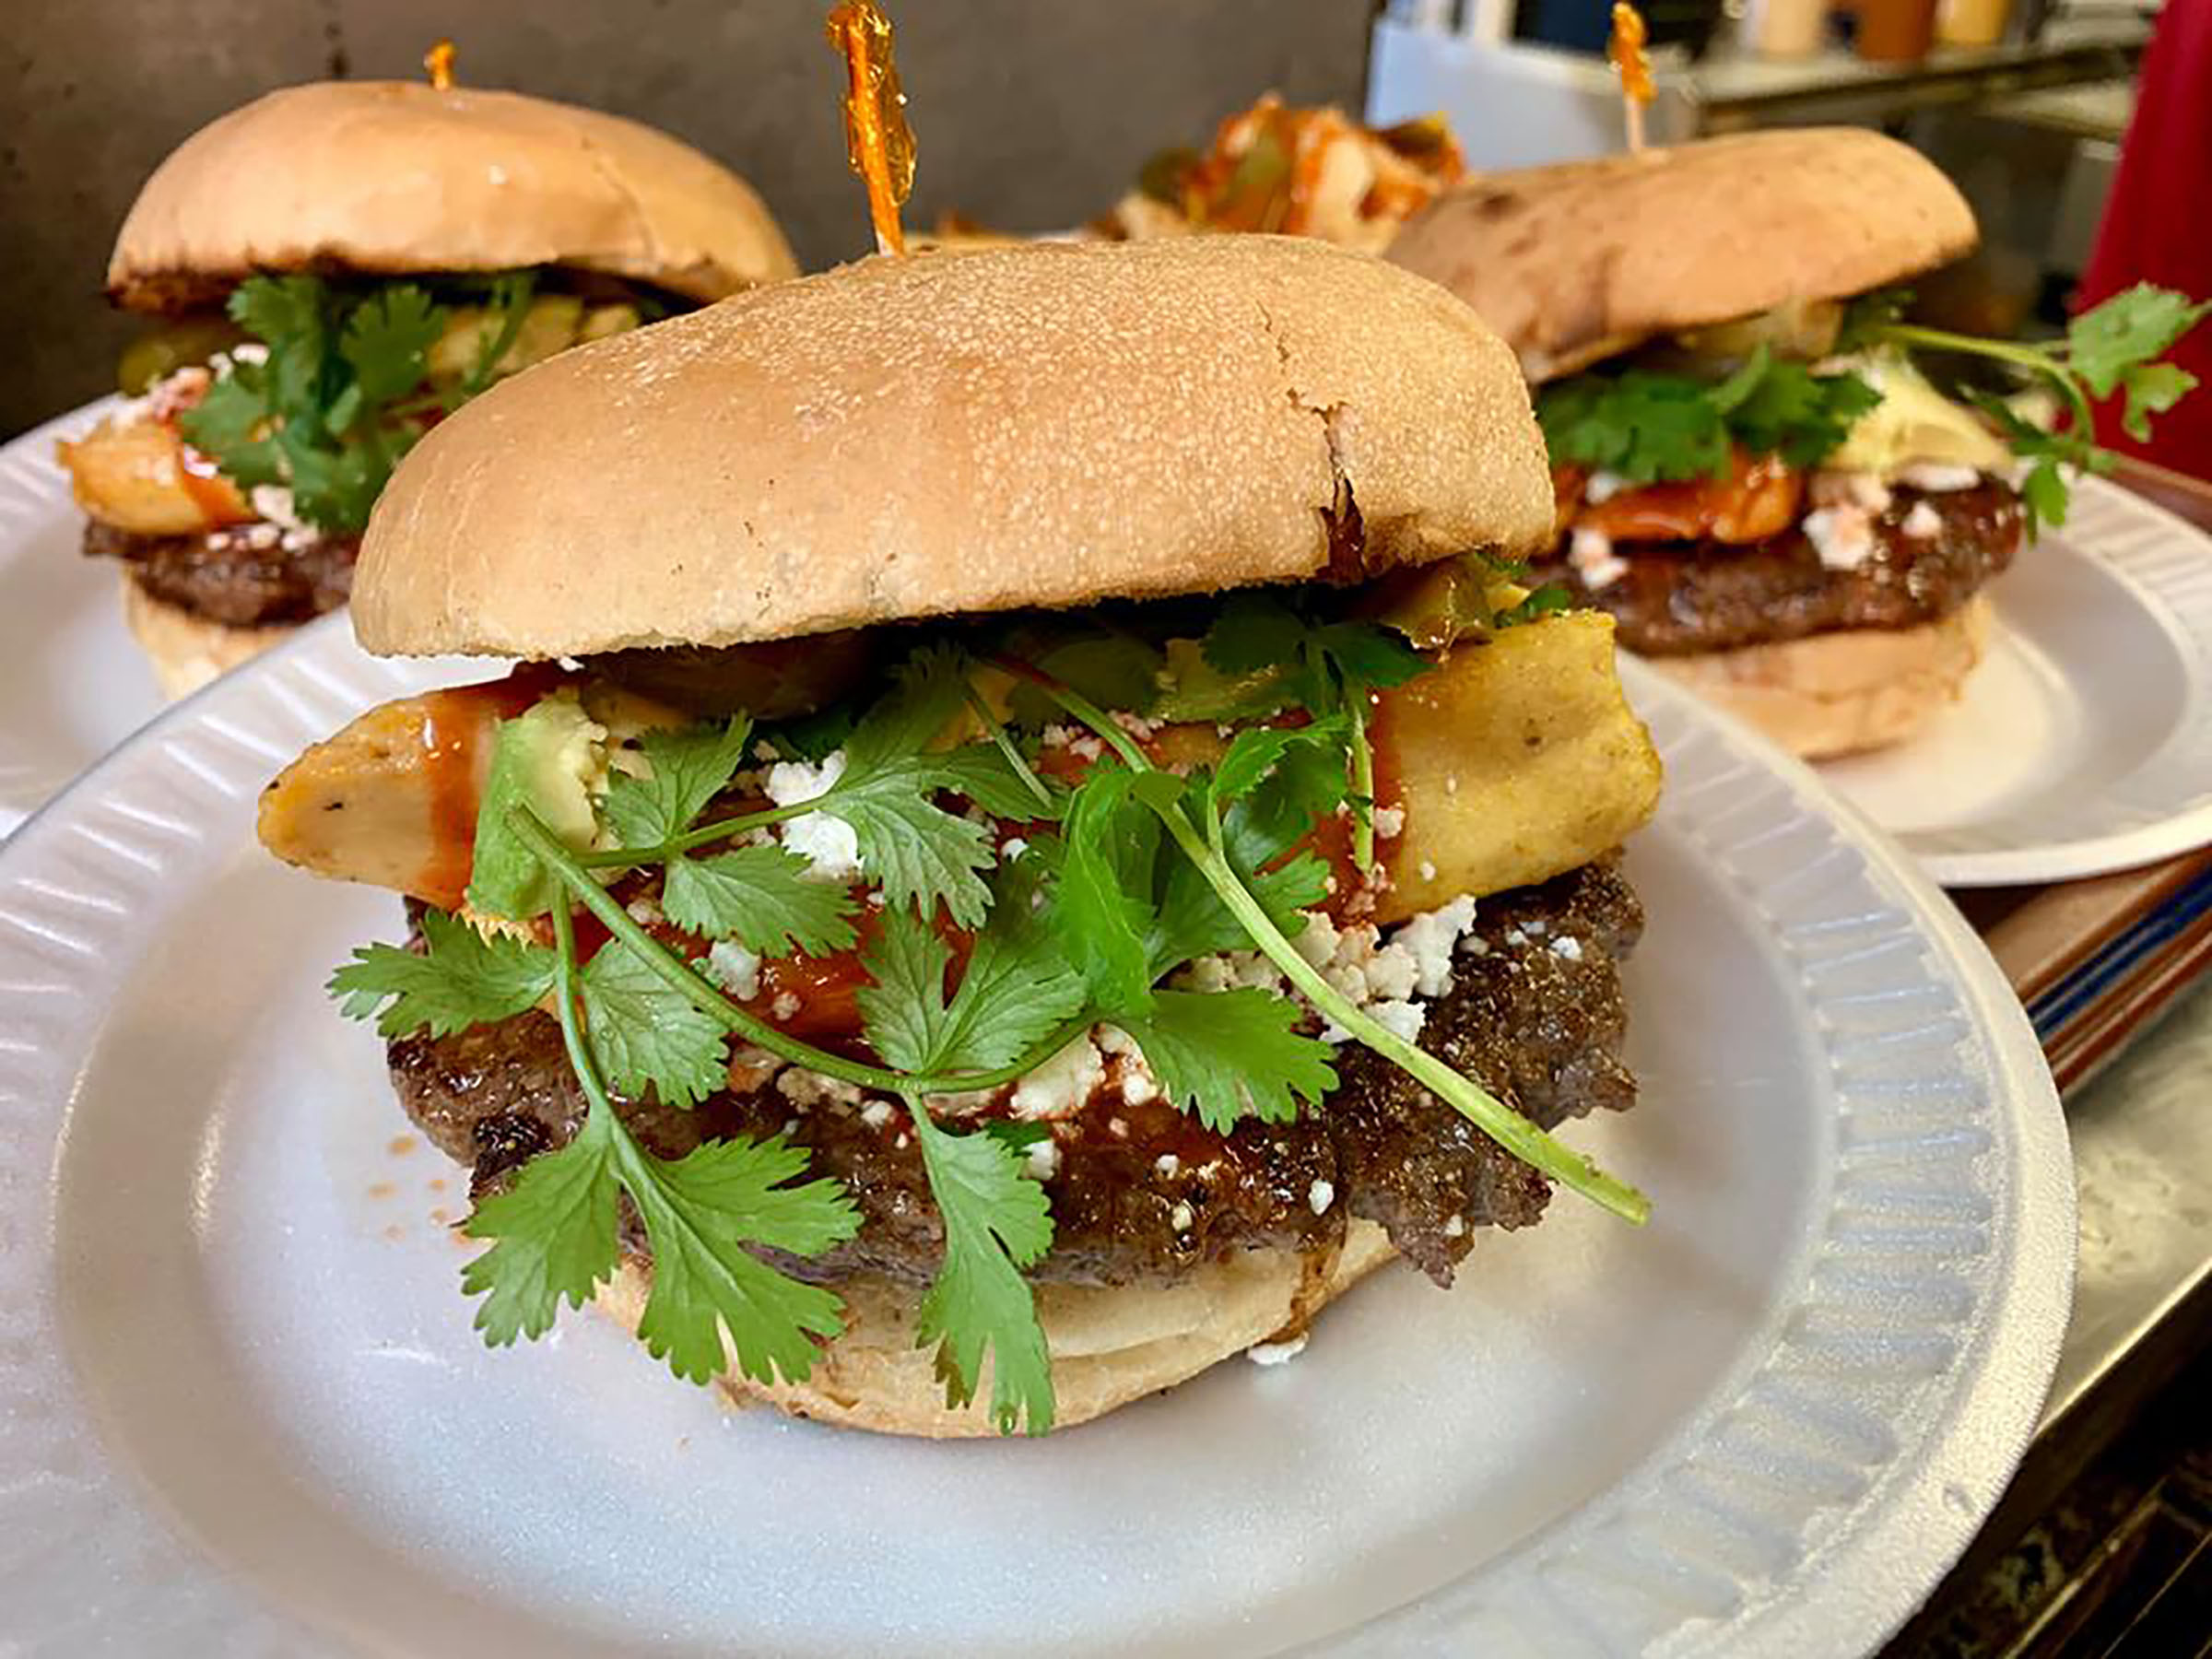 A cheeseburger topped with a tamale and cilantro